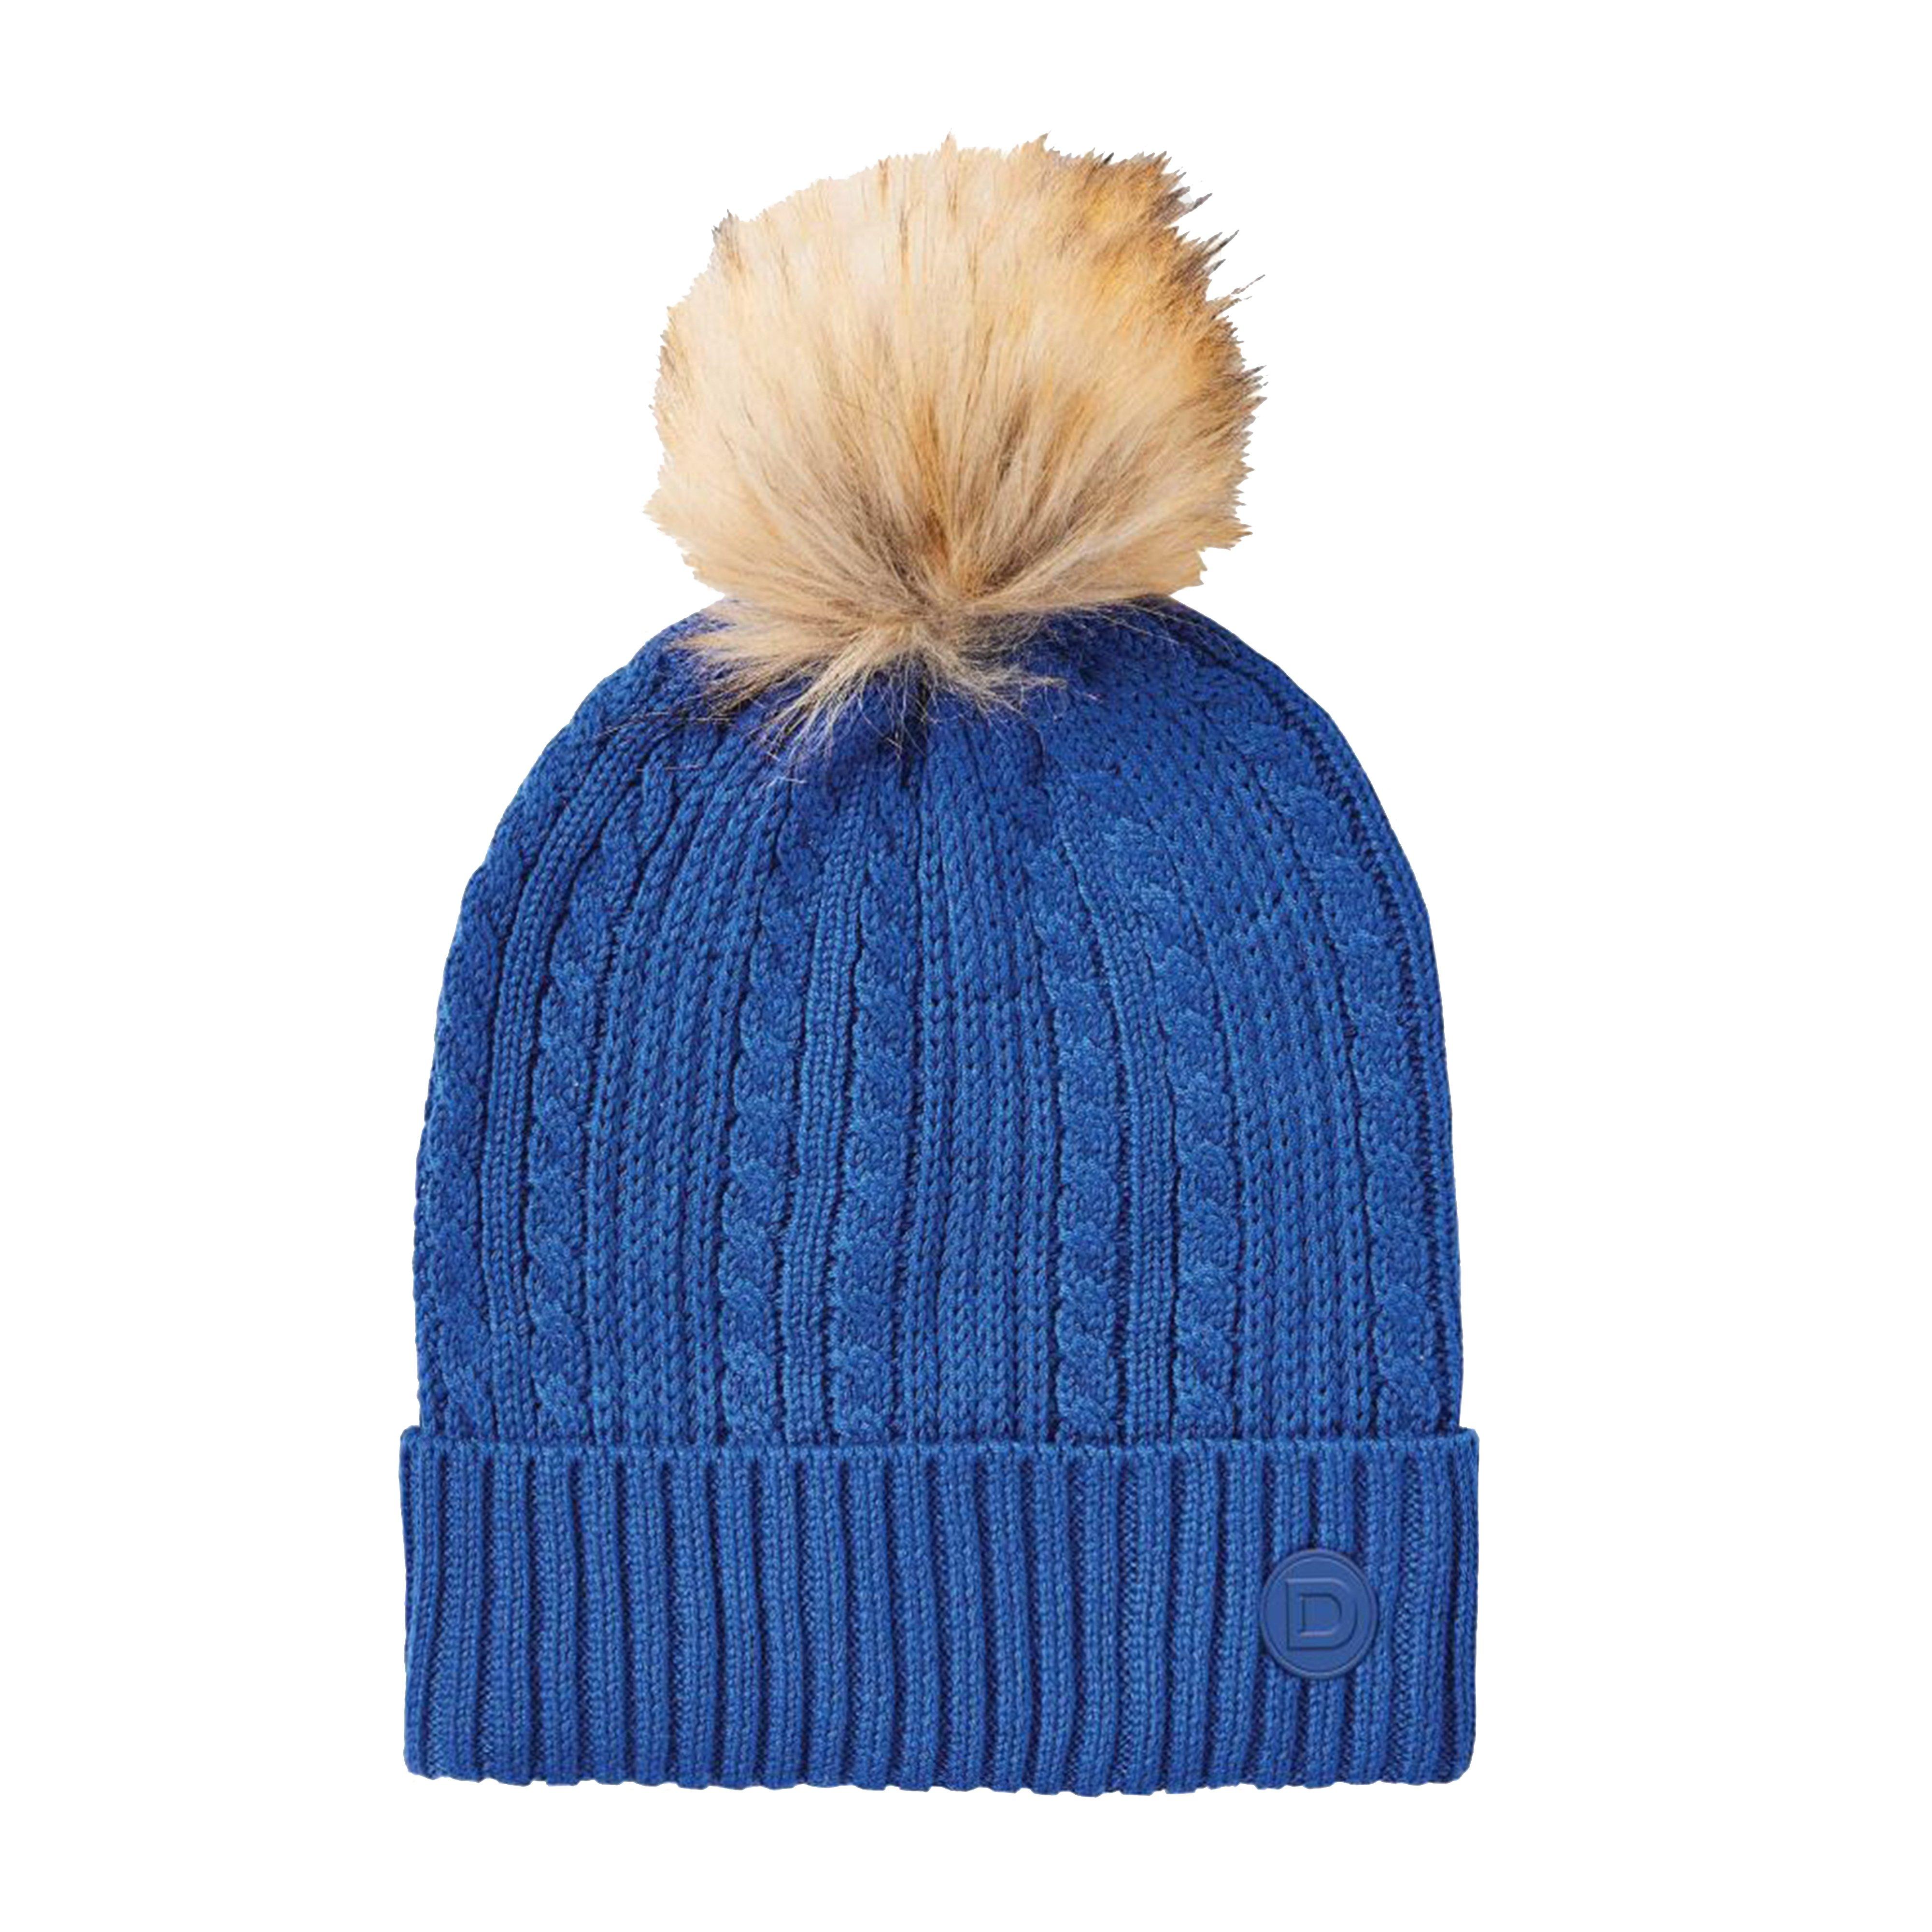 Womens Cable Knit Beanie Cobalt